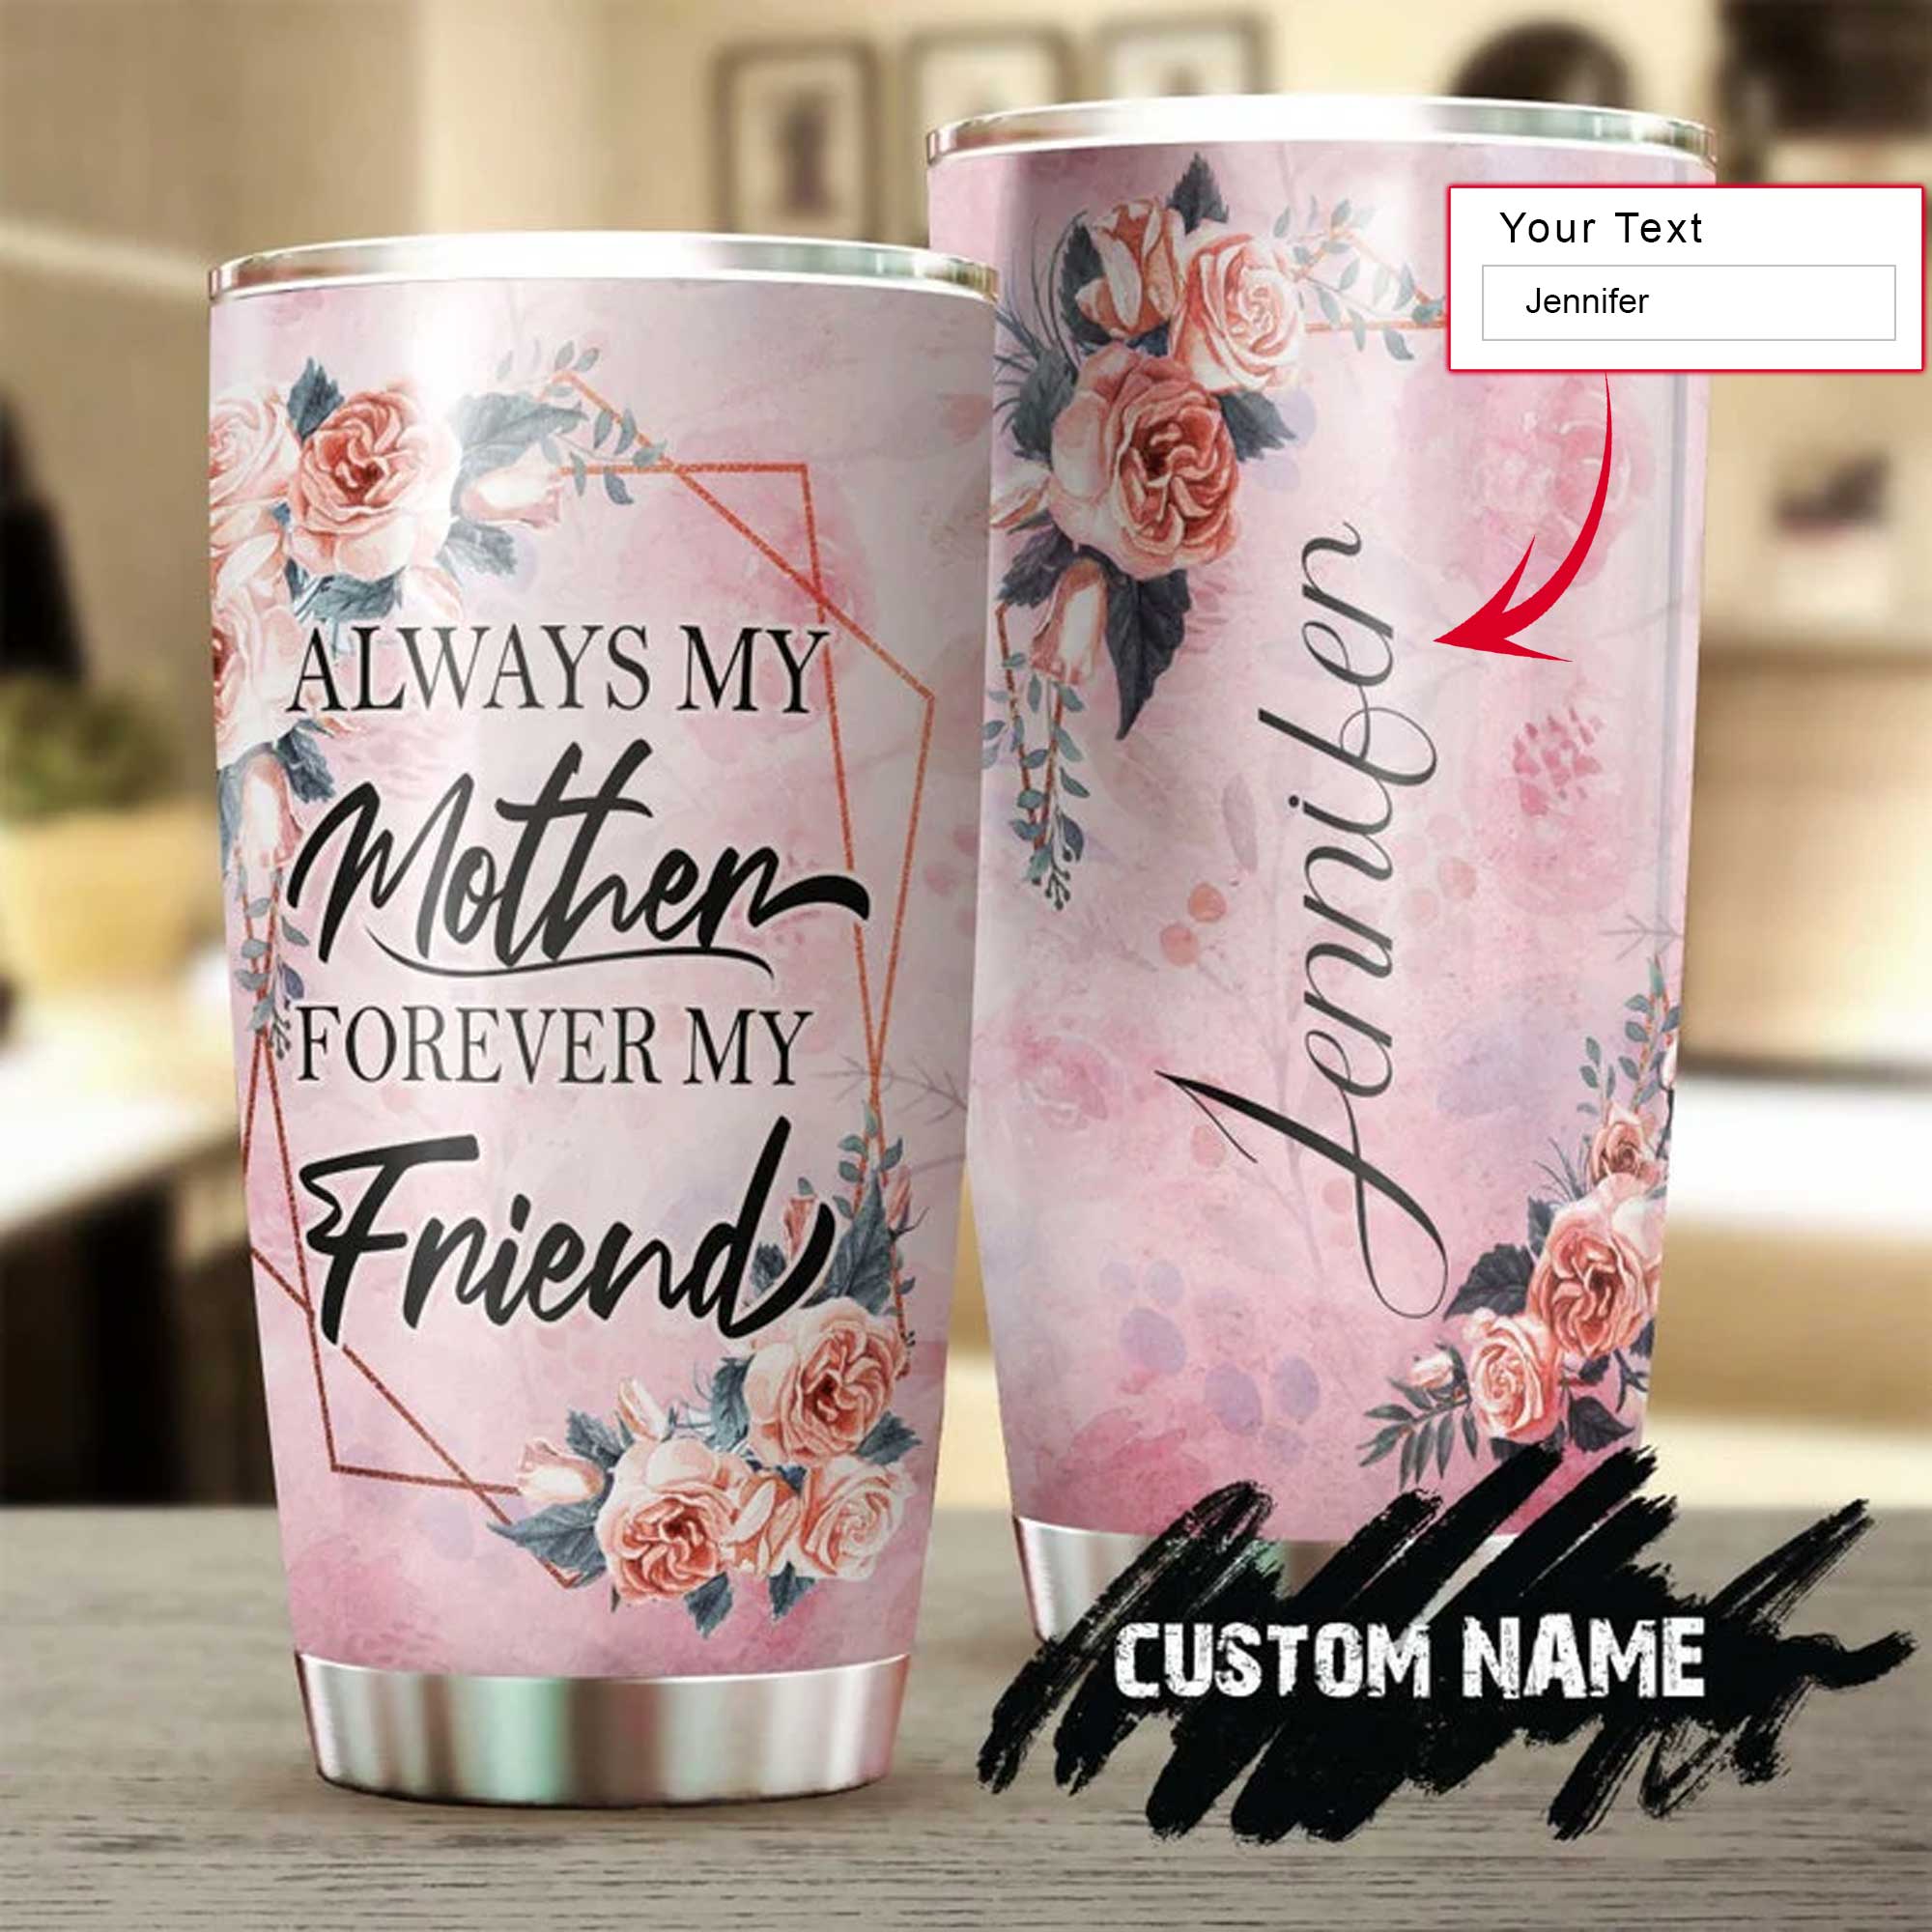 Personalized Mother's Day Gift Tumbler - Custom Gift For Mother's Day, Presents For Mom - Rose For My Mom Always My Mom Forever My Friend Tumbler